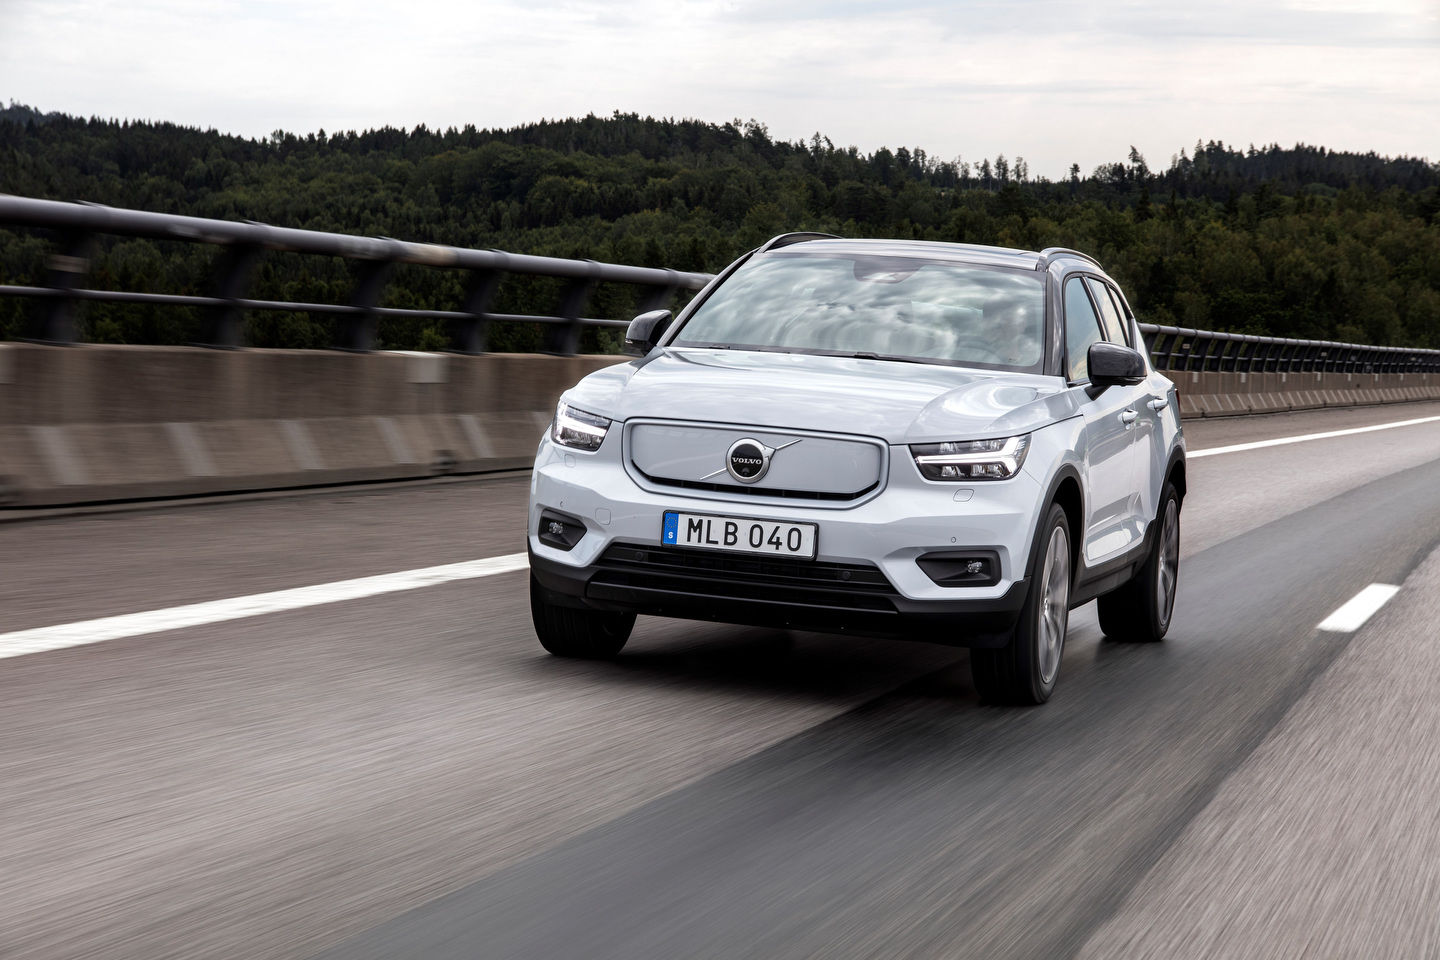 The difference between plug-in hybrid new Volvo vehicles and electric Volvo vehicles